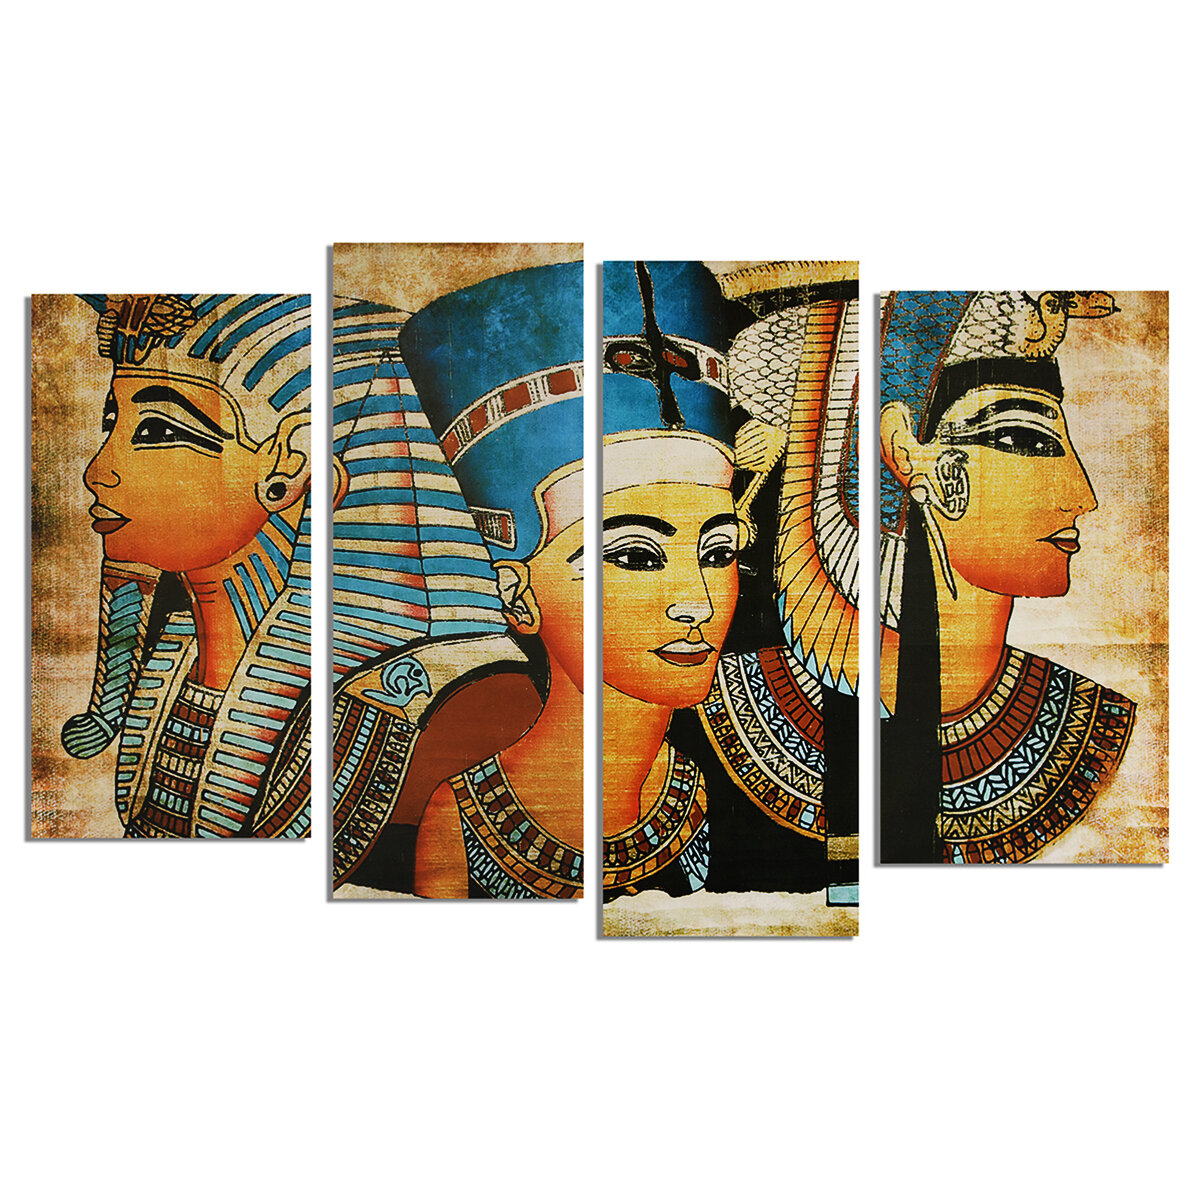 

4Pcs Canvas Print Paintings Egyptian Pharaoh Oil Painting Wall Decorative Printing Art Picture Frameless Home Office Dec